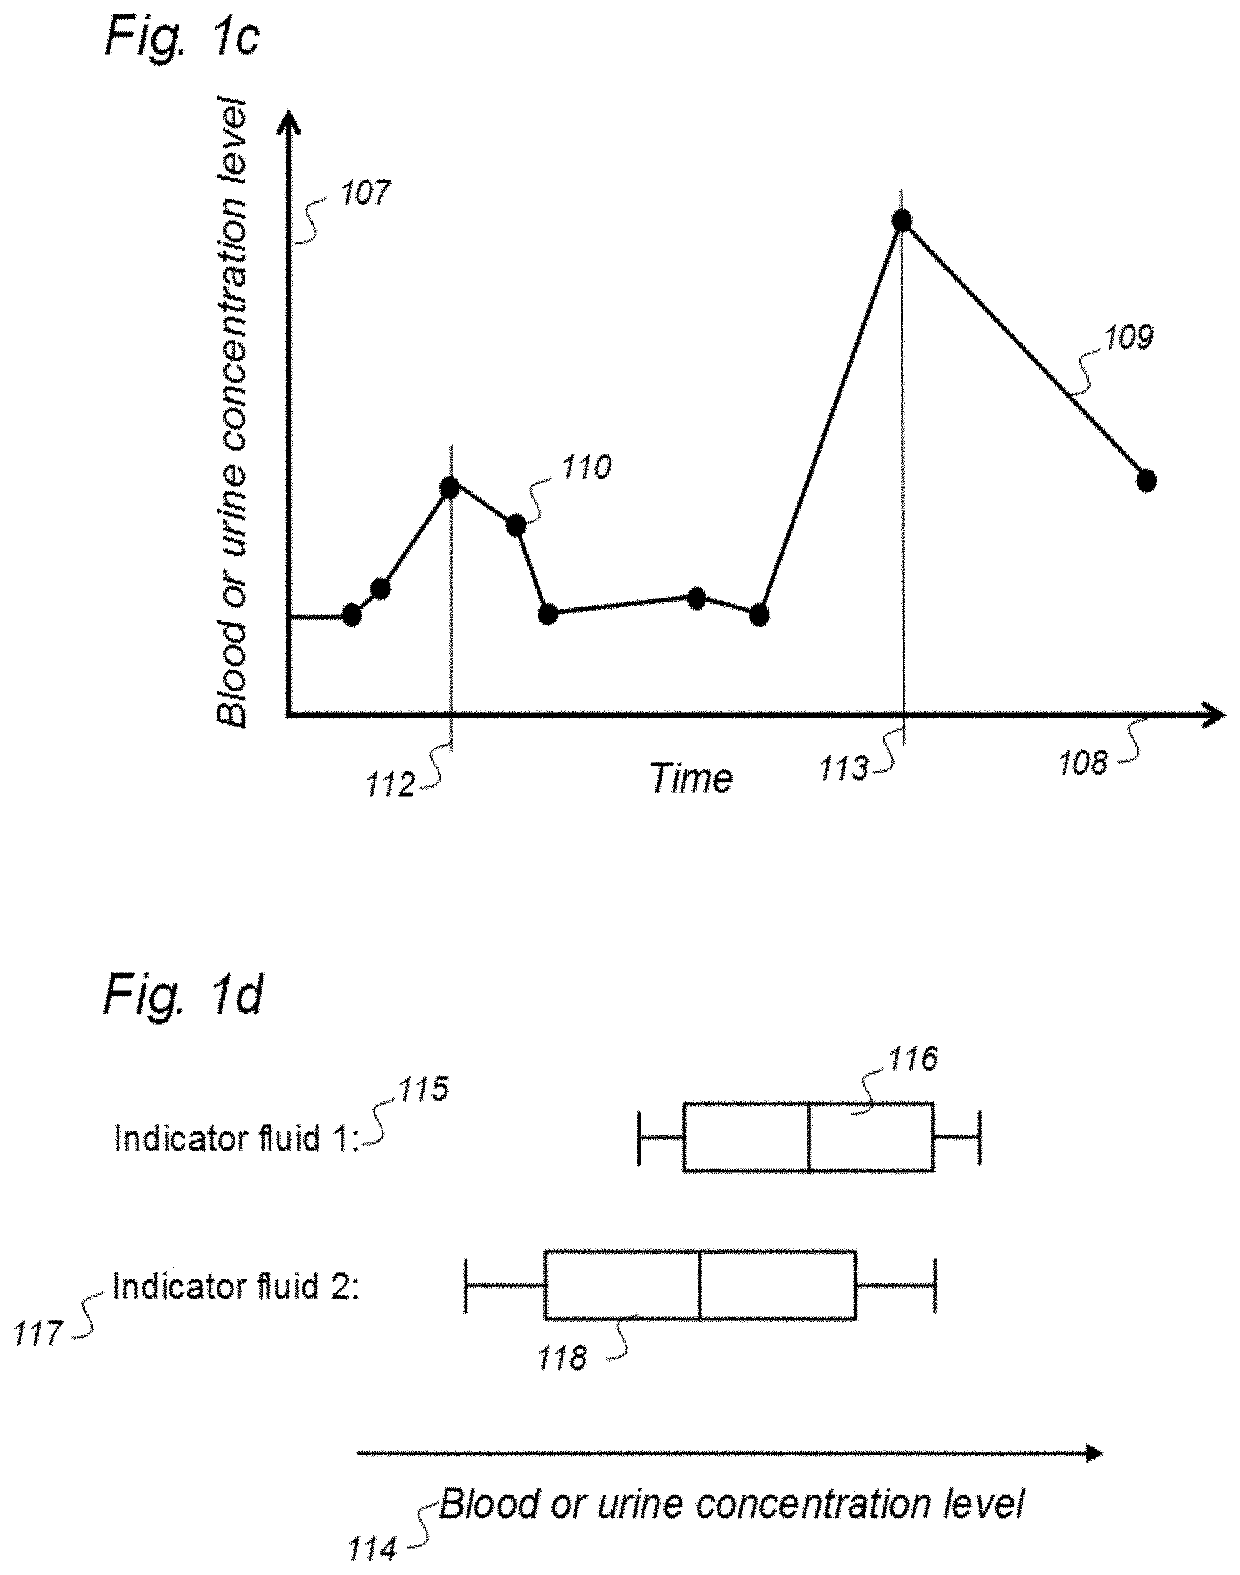 Indicator Fluids, Systems, and Methods for Assessing Movement of Substances Within, To or From a Cerebrospinal Fluid, Brain or Spinal Cord Compartment of a Cranio-Spinal Cavity of a Human